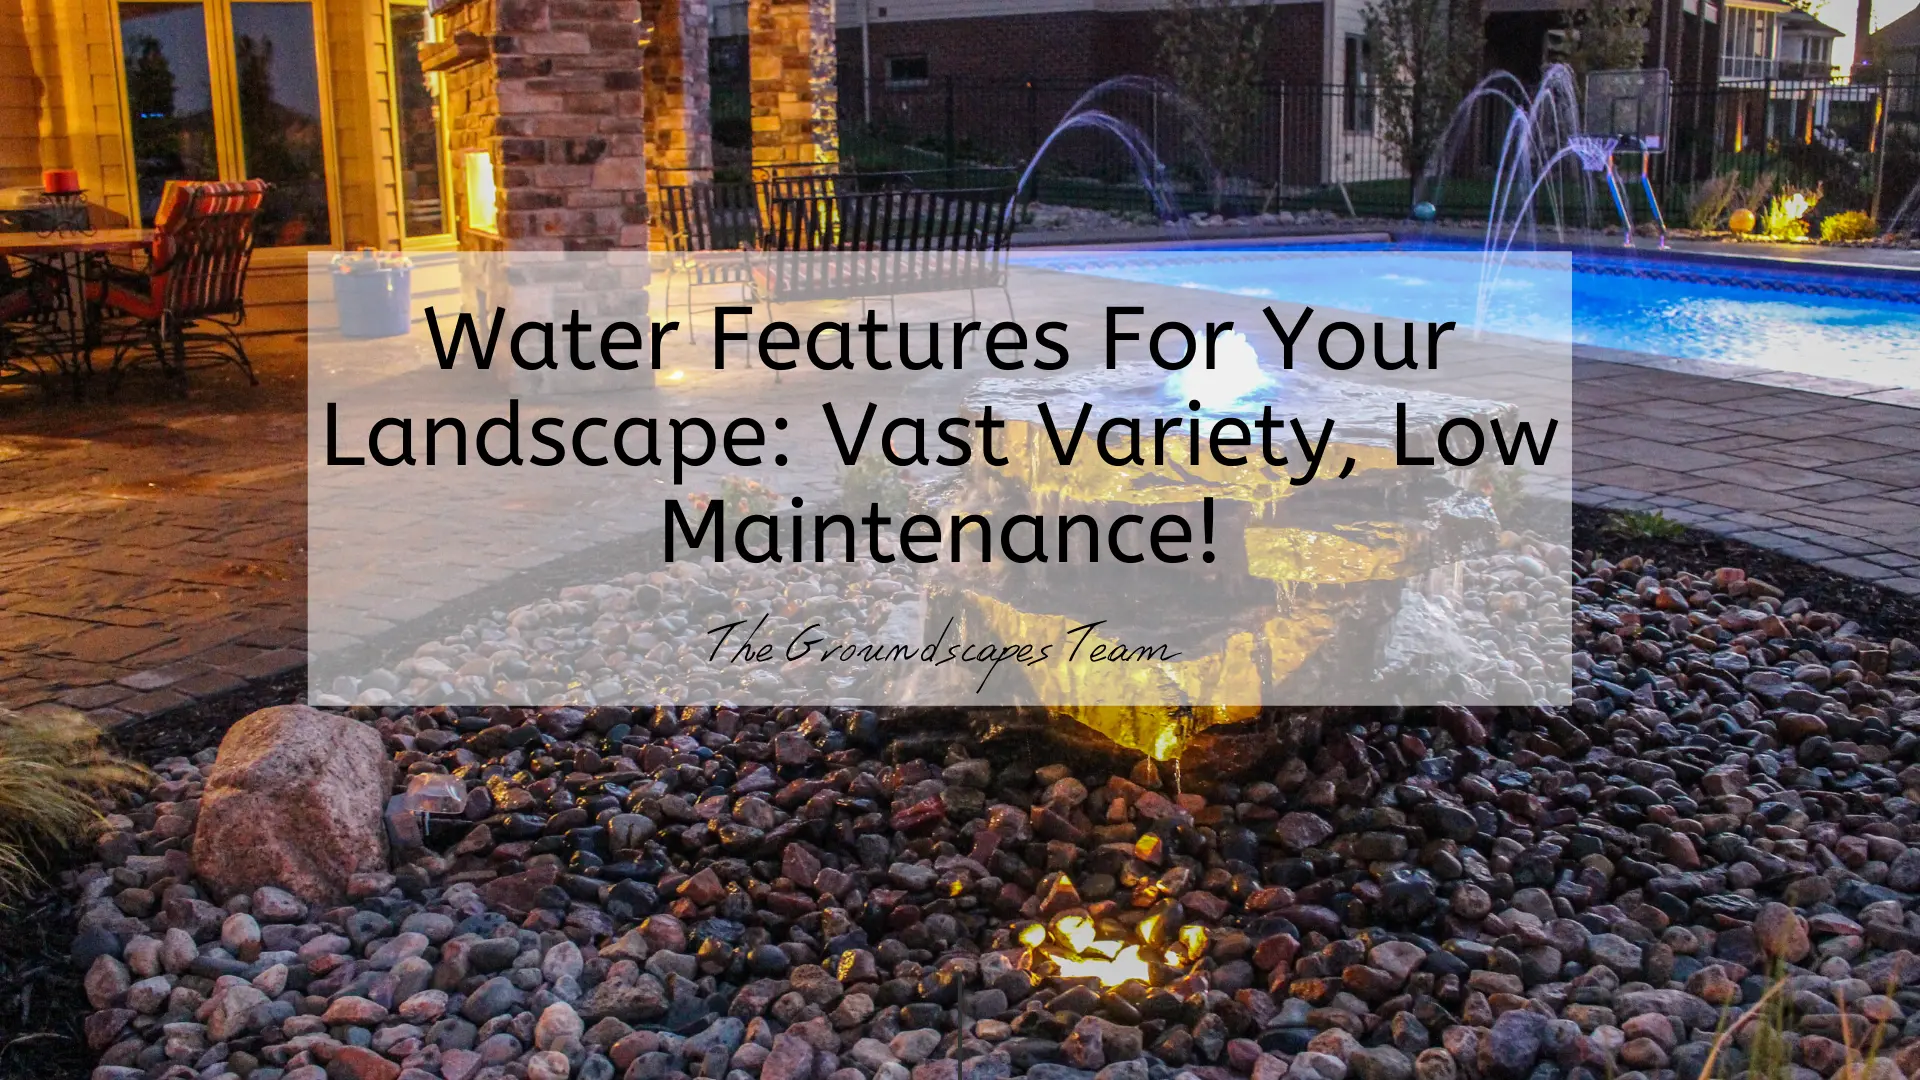 Water Features For Your Landscape: Vast Variety, Low Maintenance!